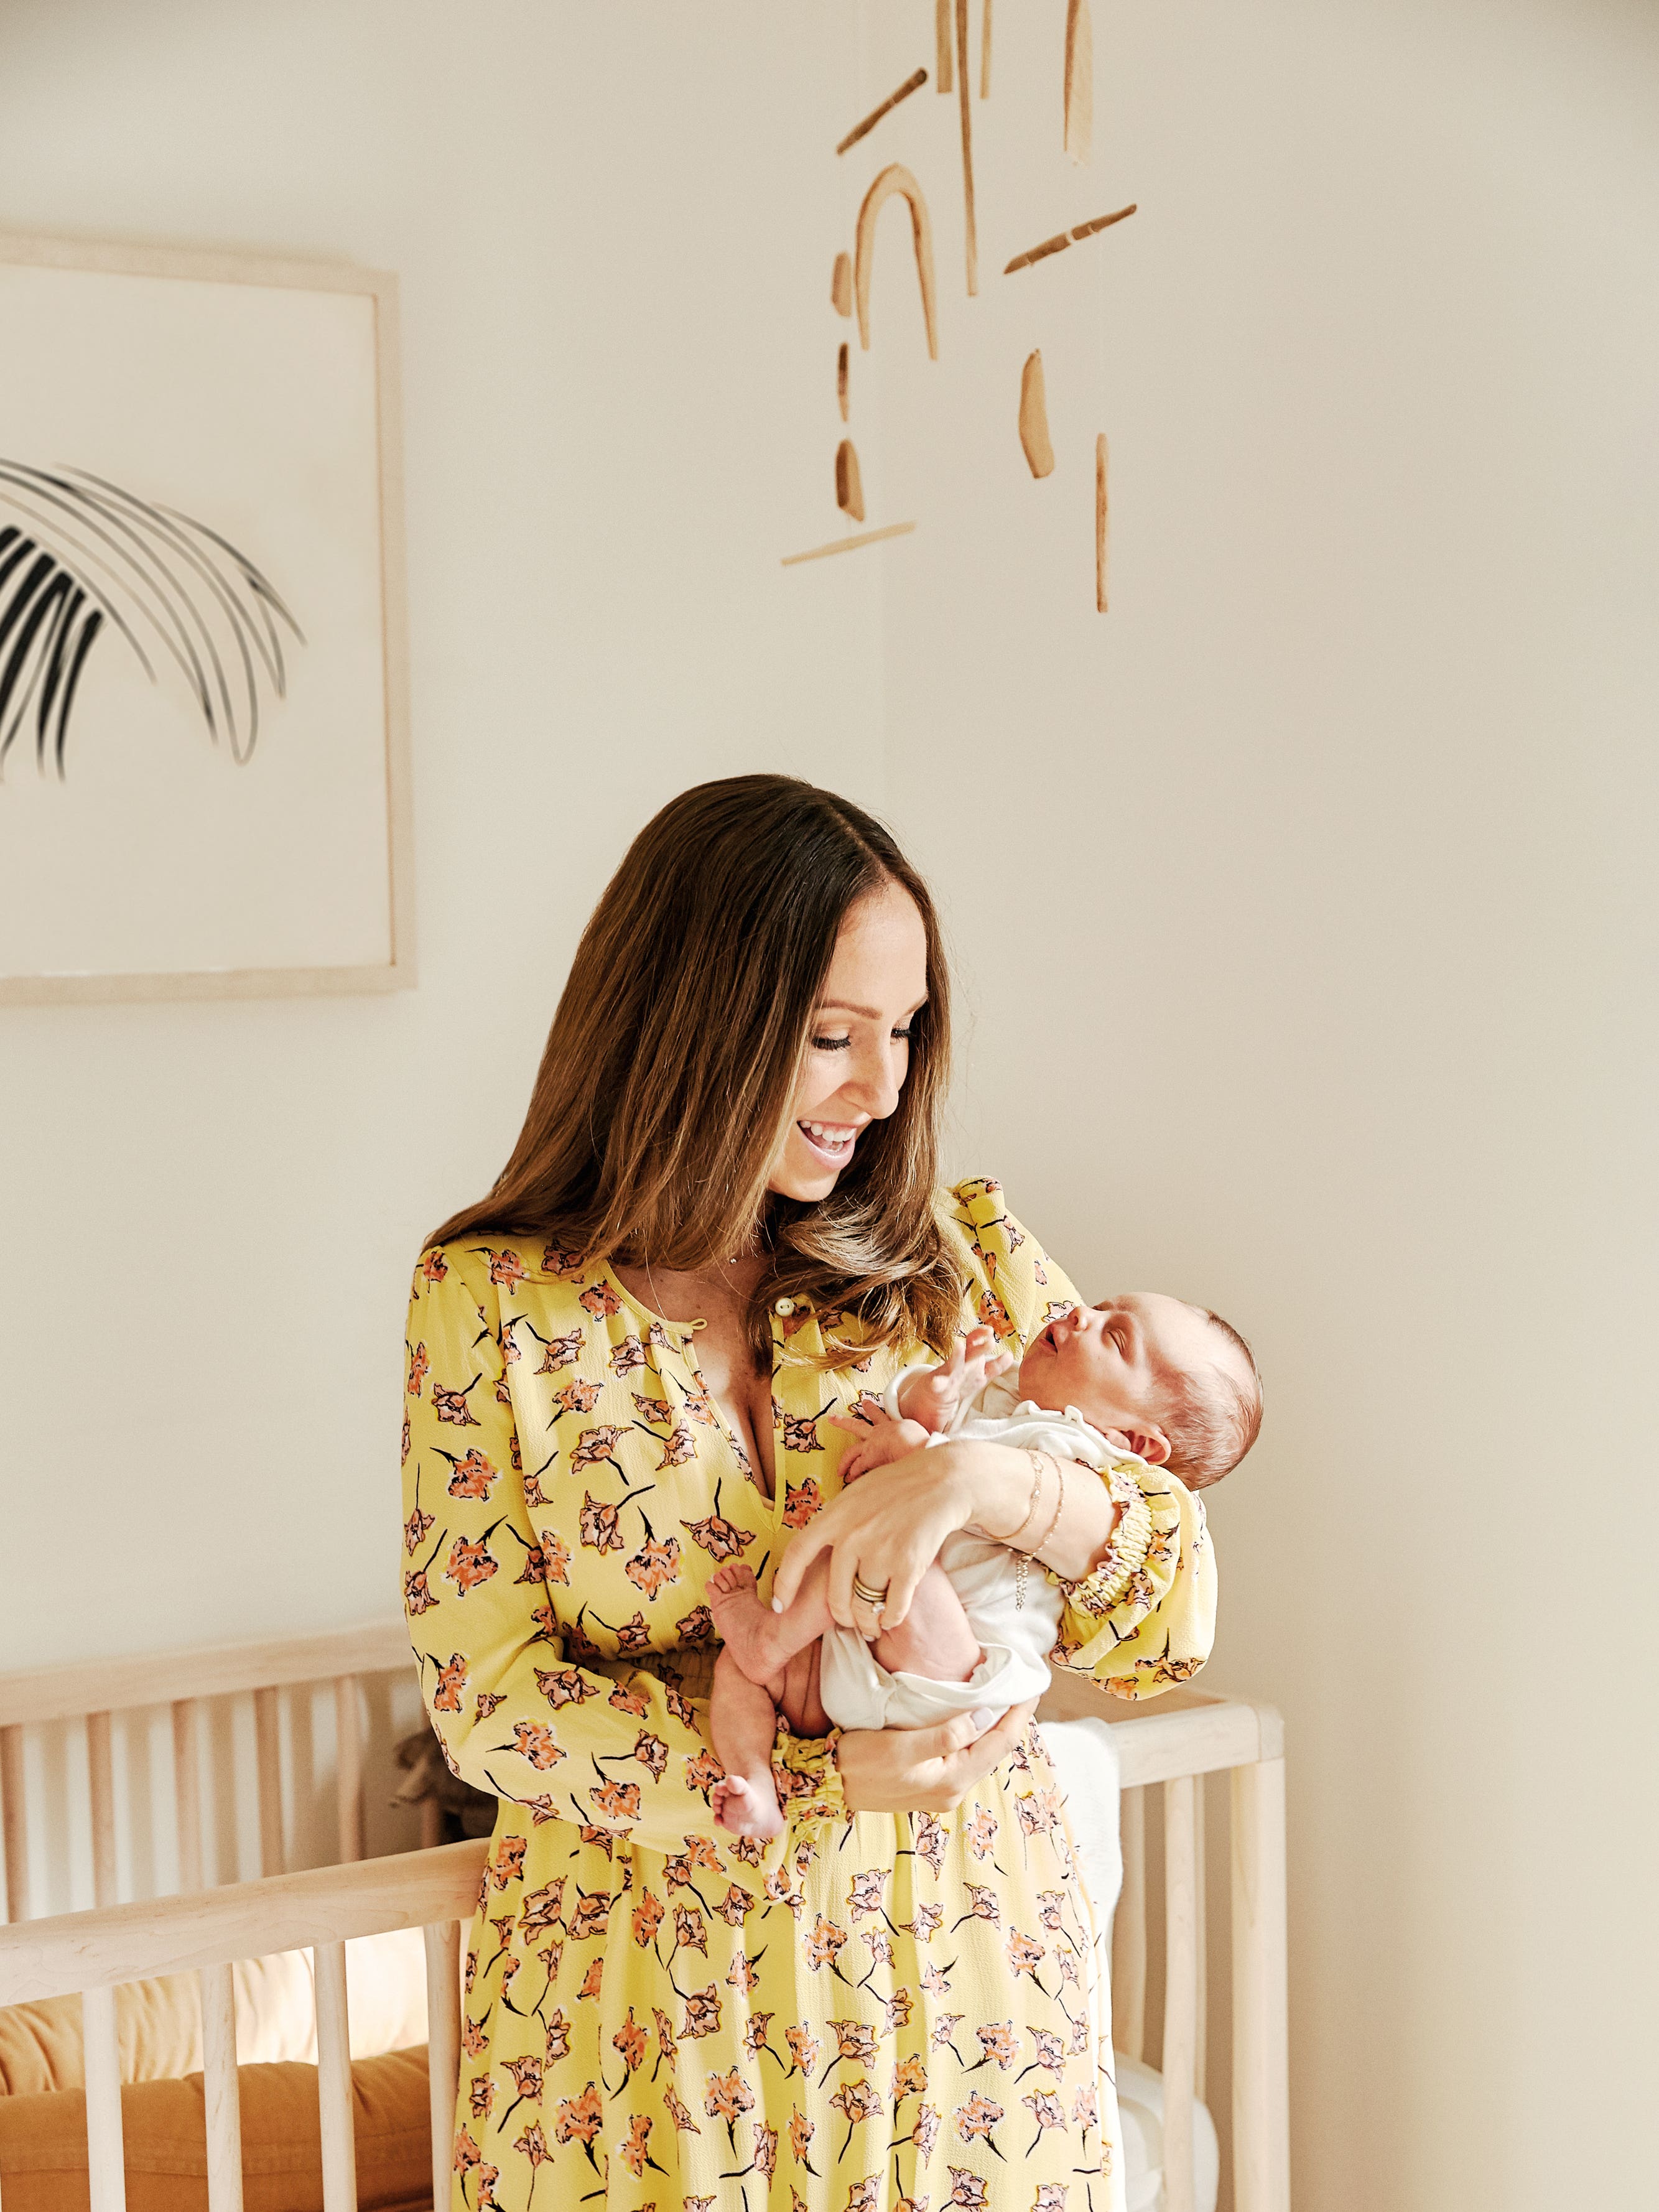 Of Course, Parachute Founder Ariel Kaye Dreamt Up the Sweetest Nursery